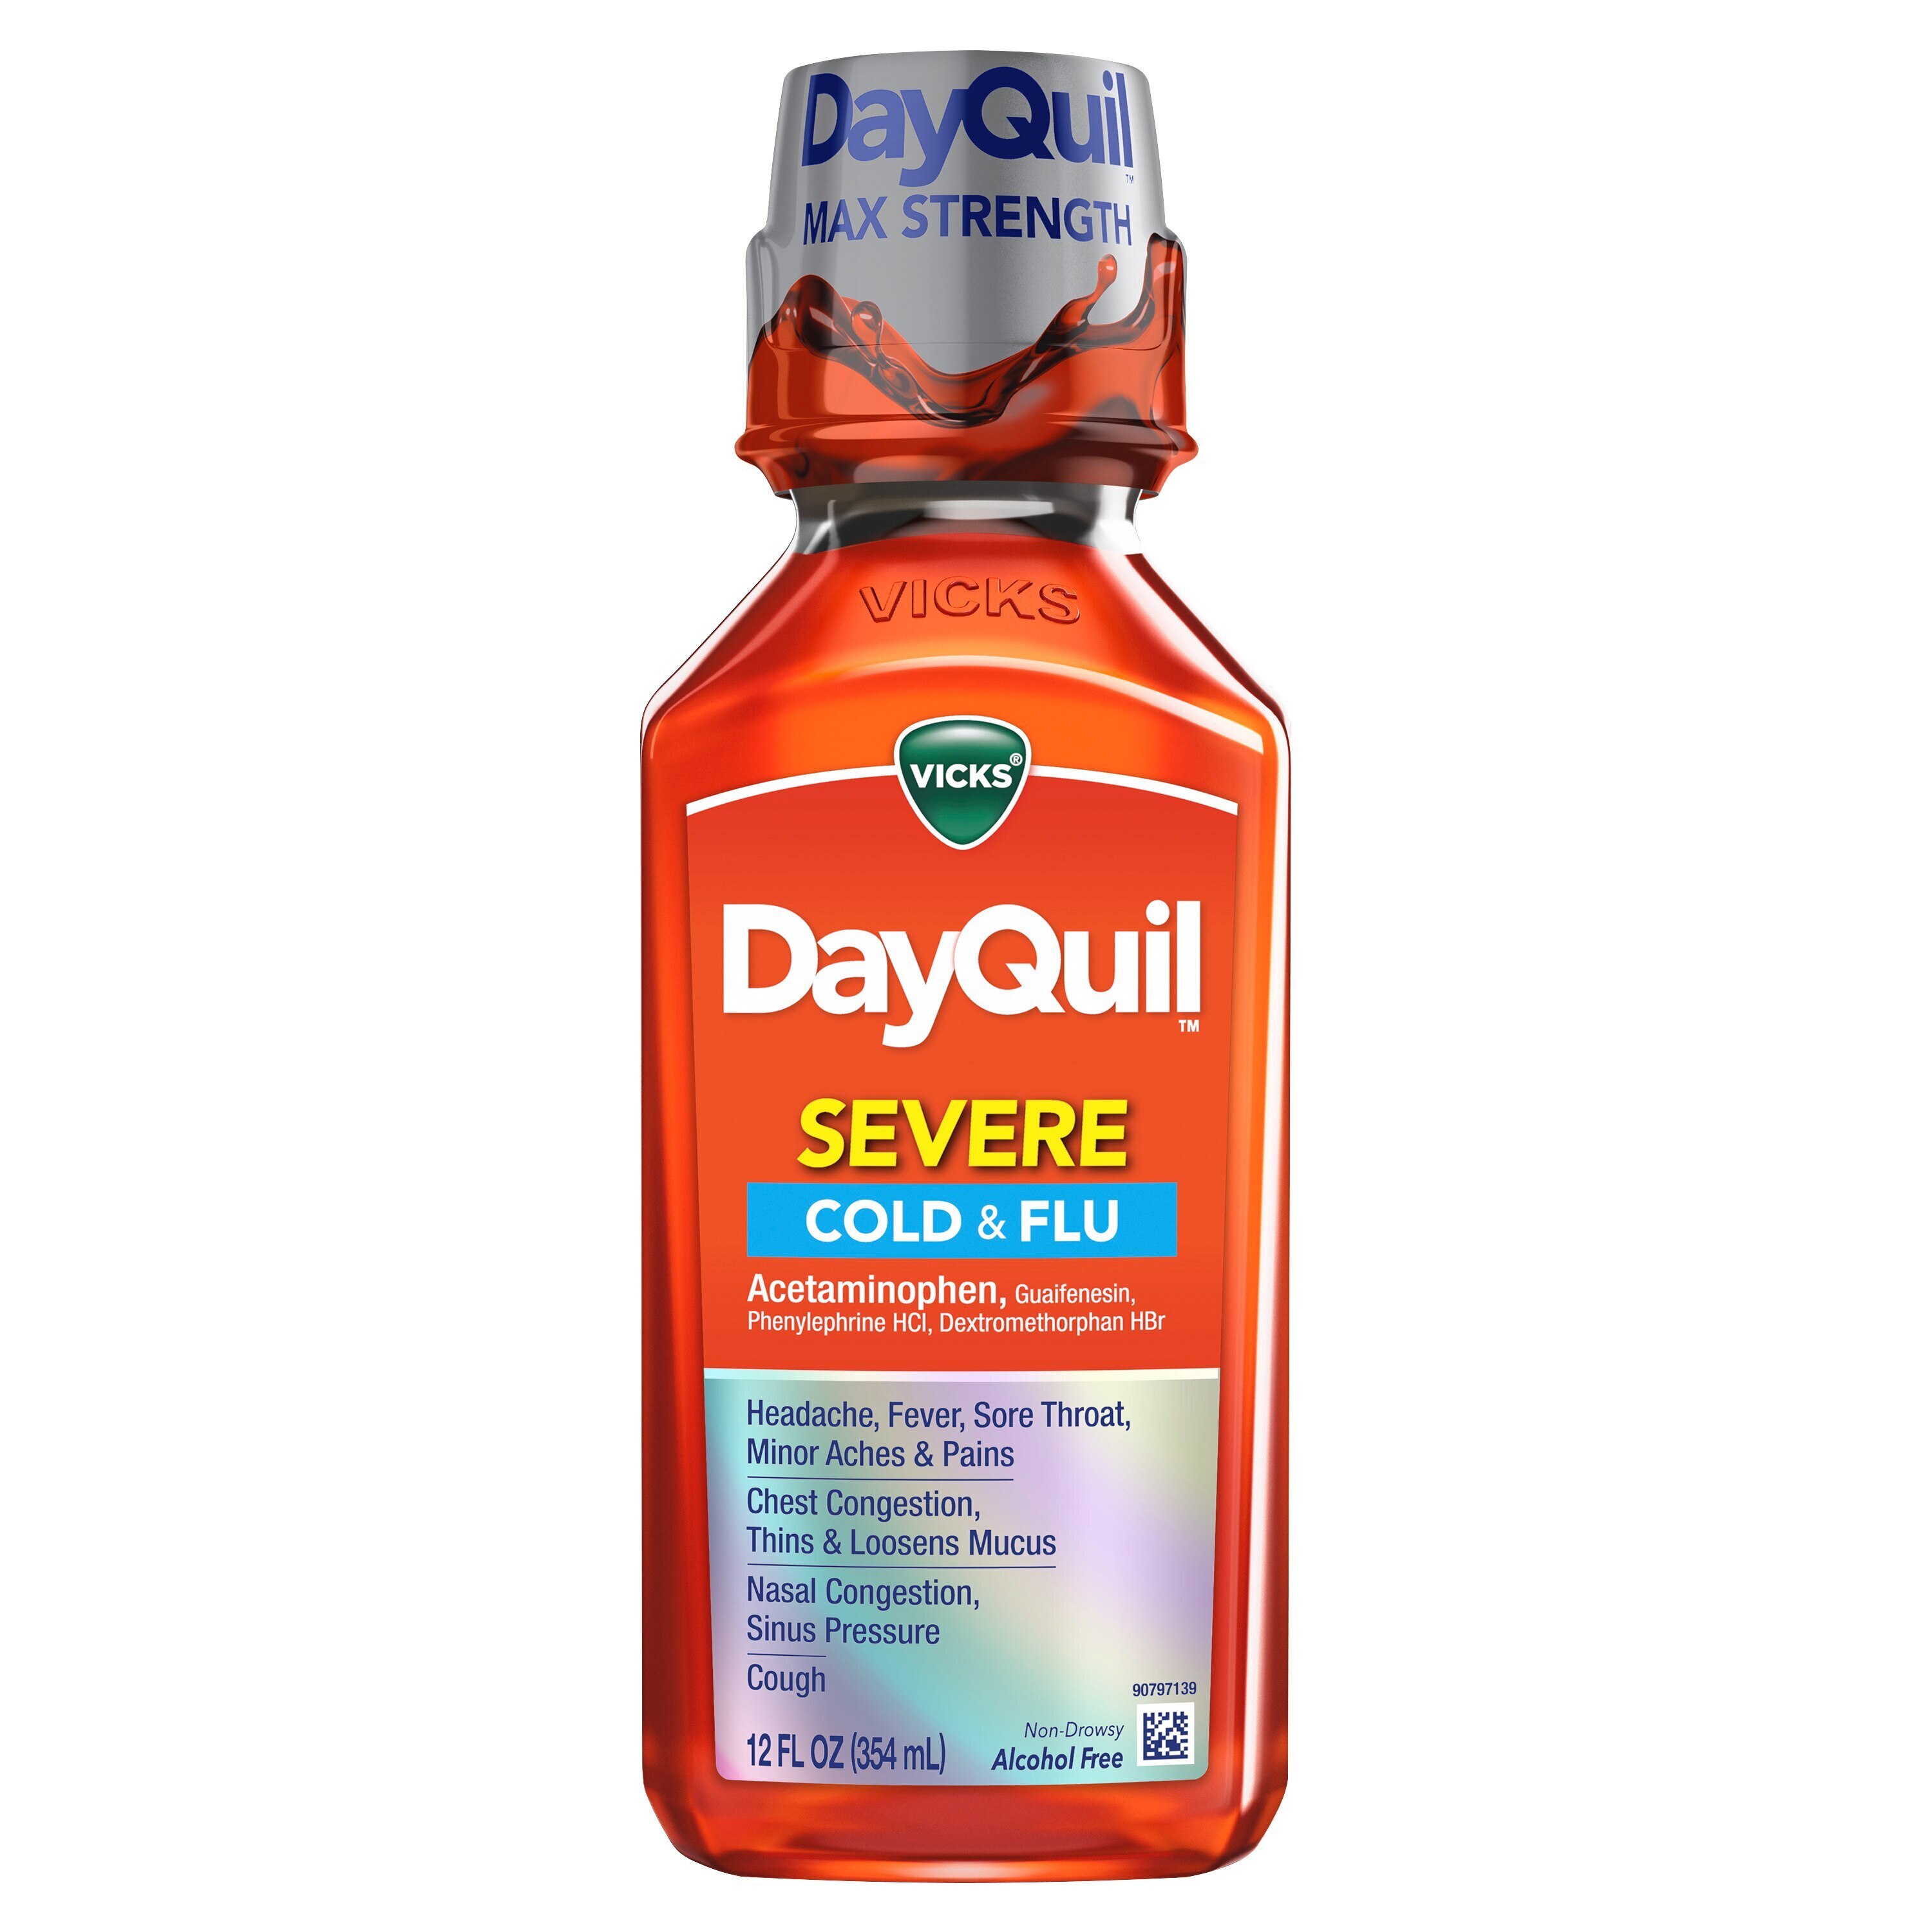 Vicks DayQuil SEVERE Cough, Cold & Flu Relief Liquid - Relieves Daytime Sore Throat, Fever, and Congestion